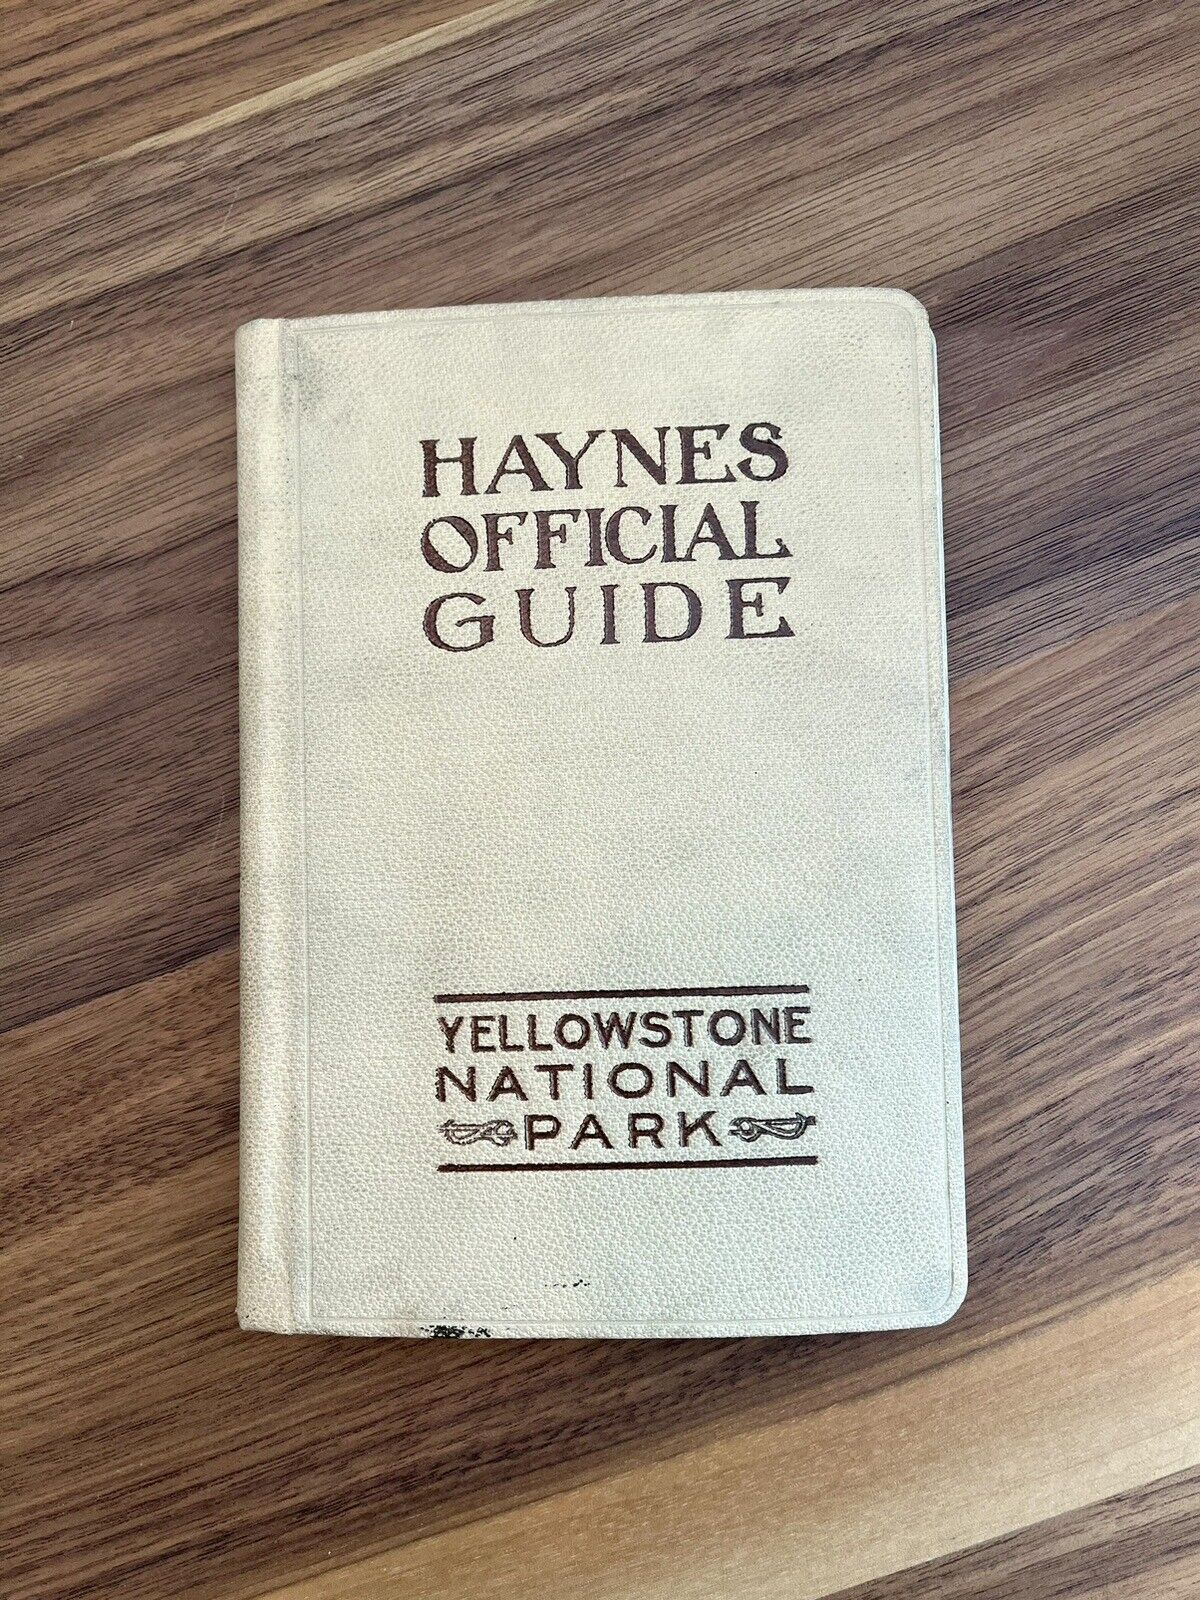 Antique Haynes Official Guide Yellowstone 1912 Includes Handwritten Owner Note